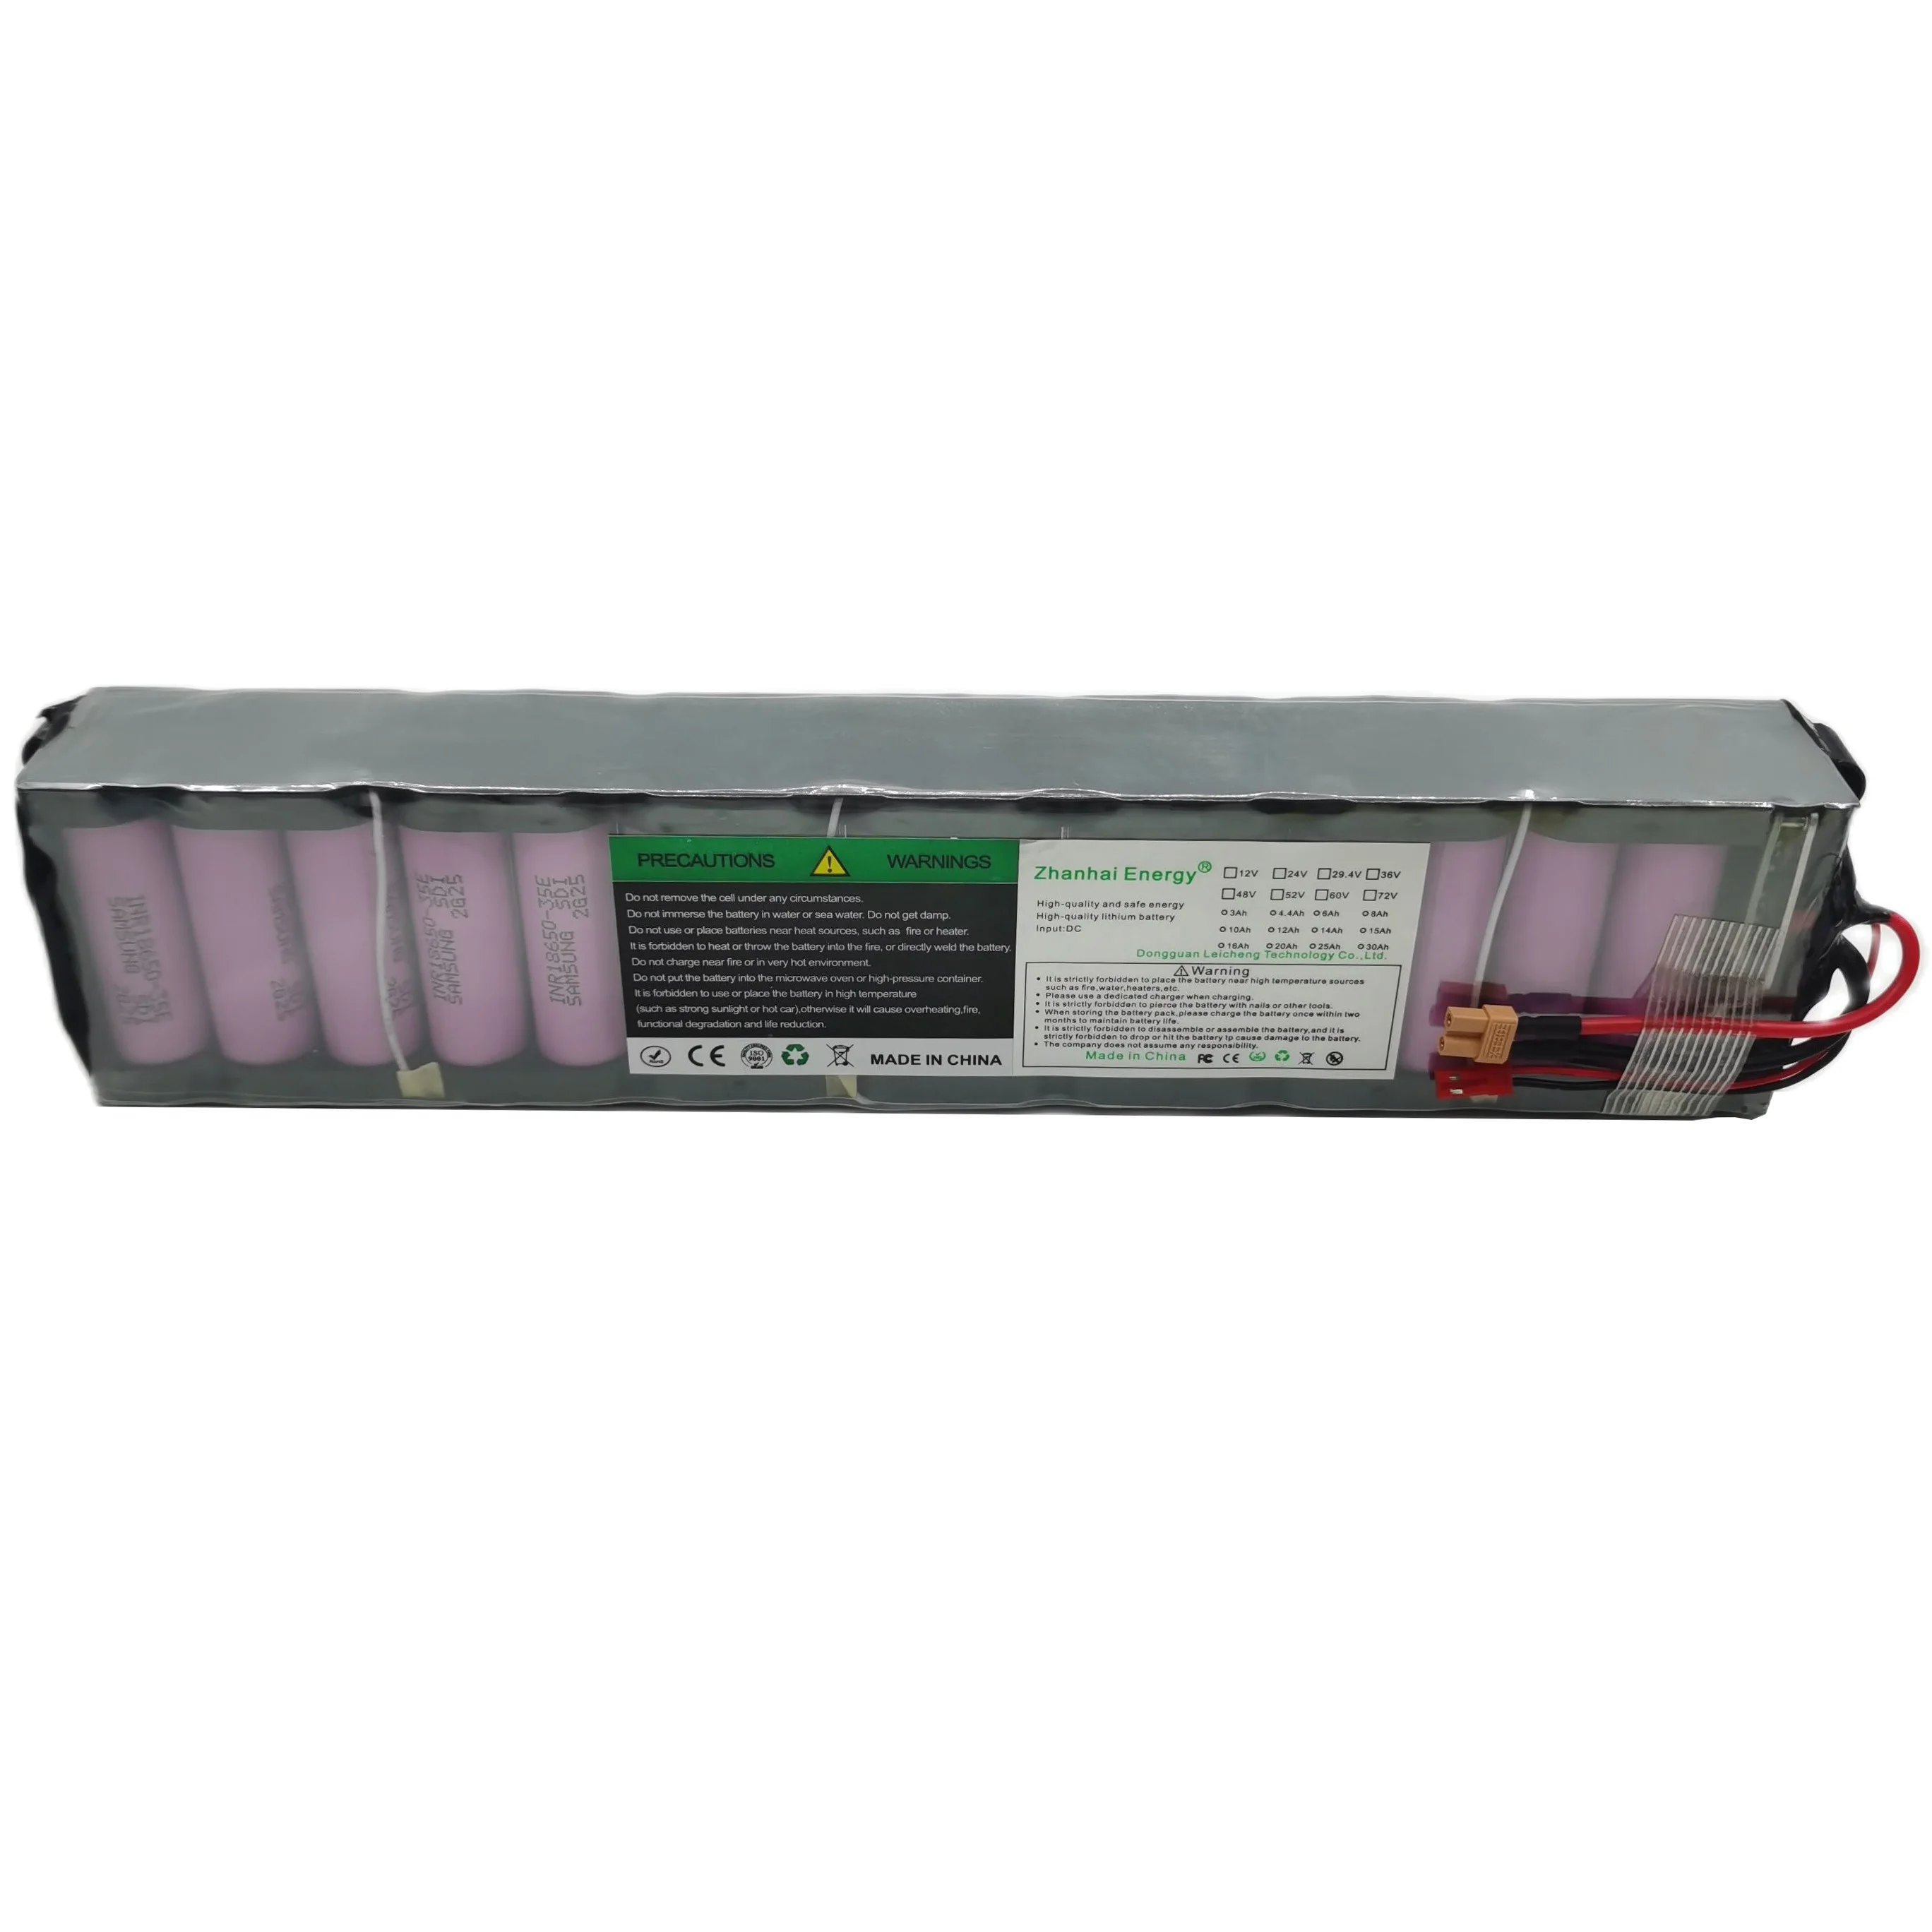 

36V 9600mAh 7800mAh 18650 Li-ion Rechargeable Battery Pack 10S 3P For Xiaomi M365 Electric Scooter Wholesale Available New